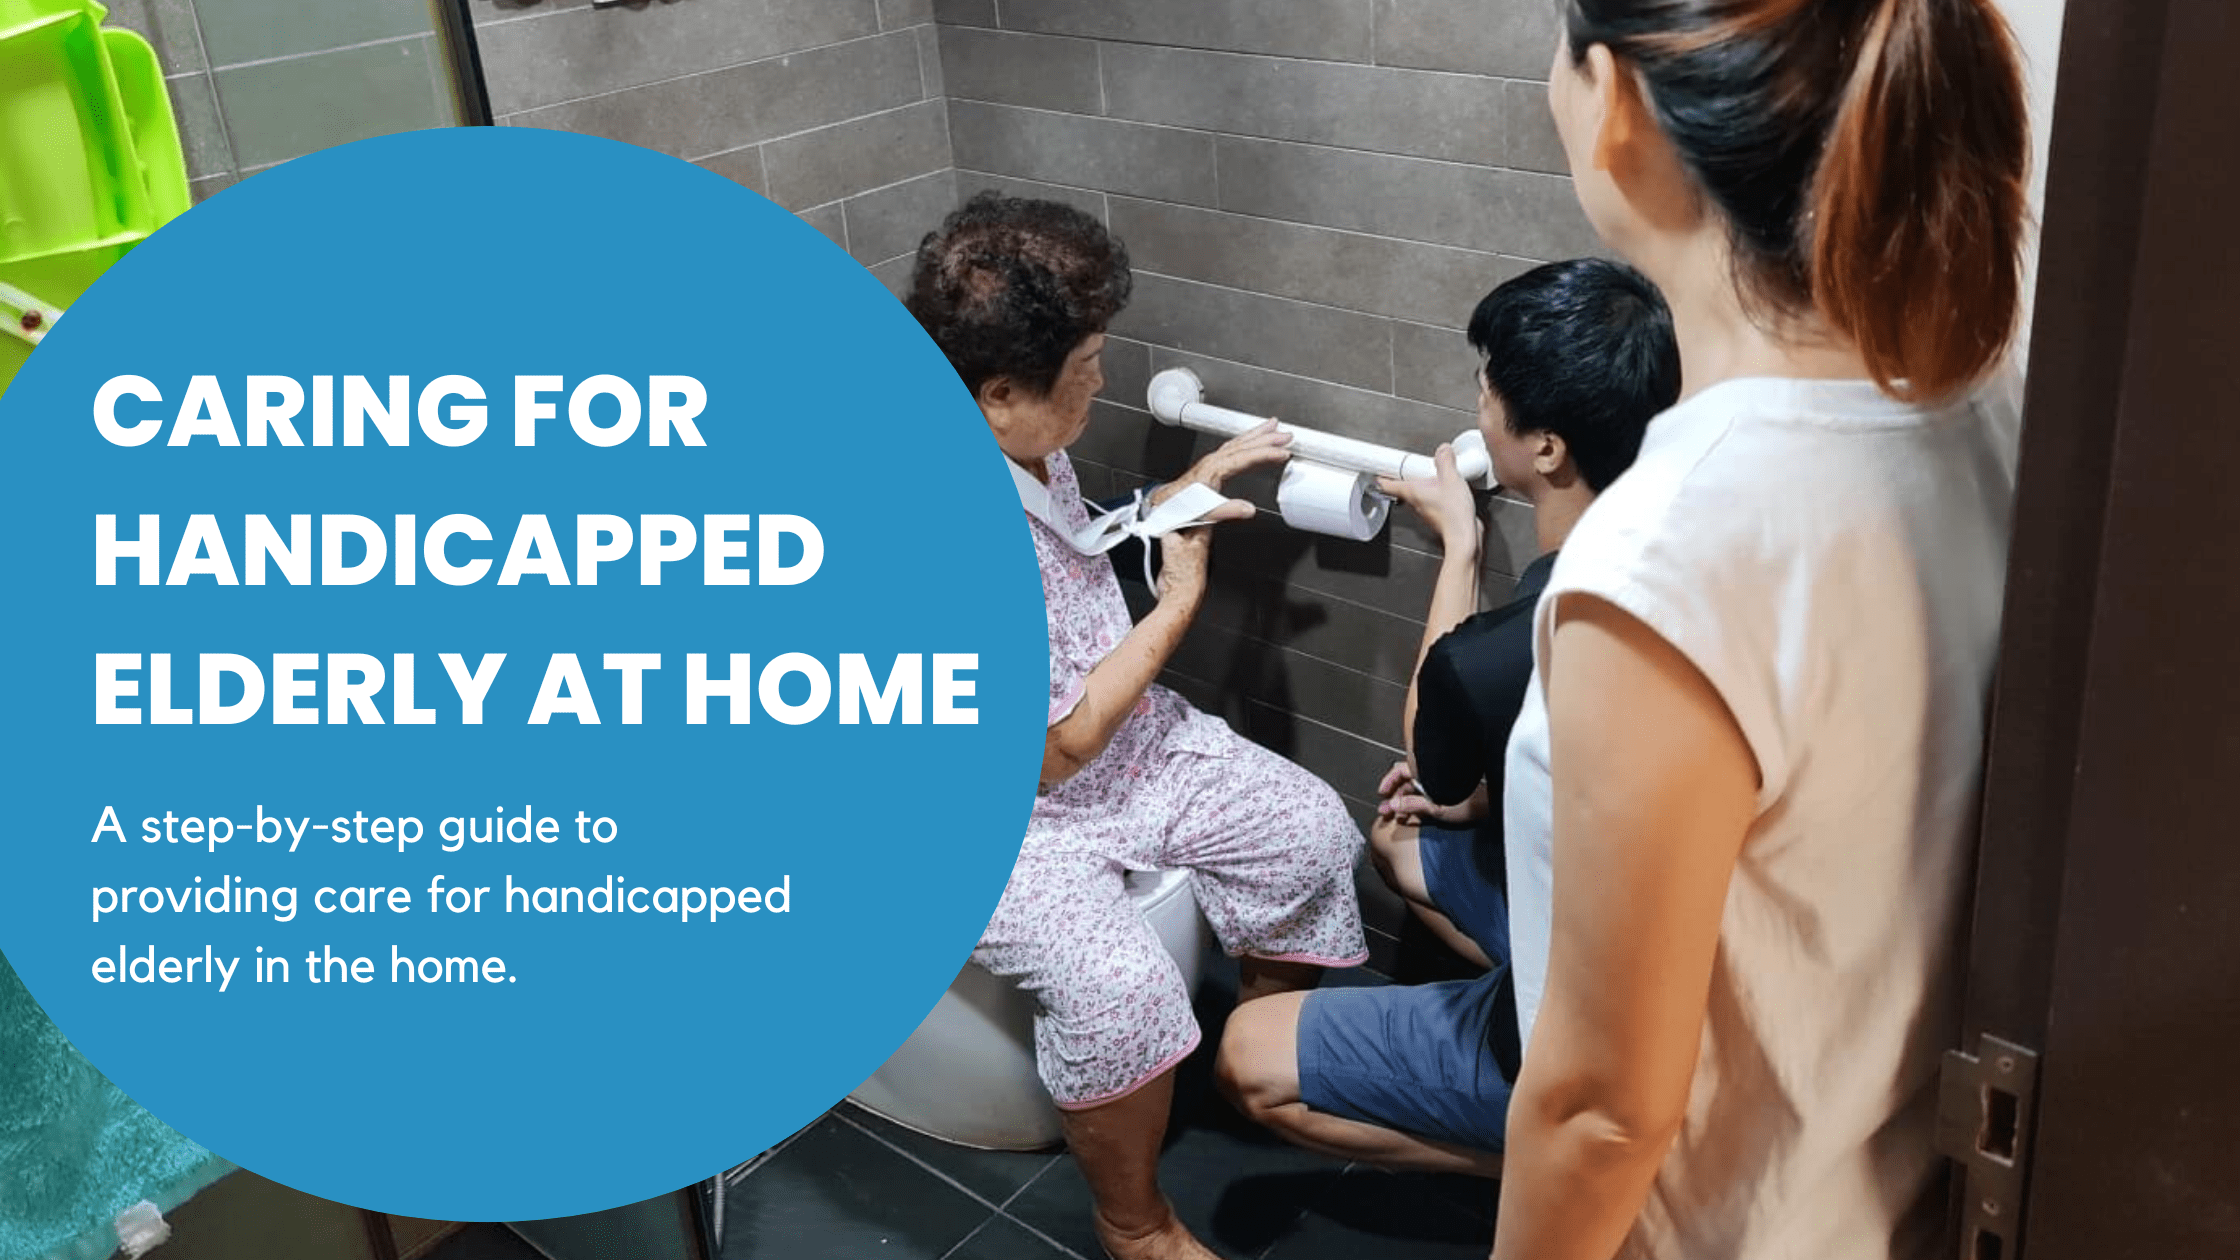 A Step-by-Step Guide: Caring for Handicapped Elderly at Home